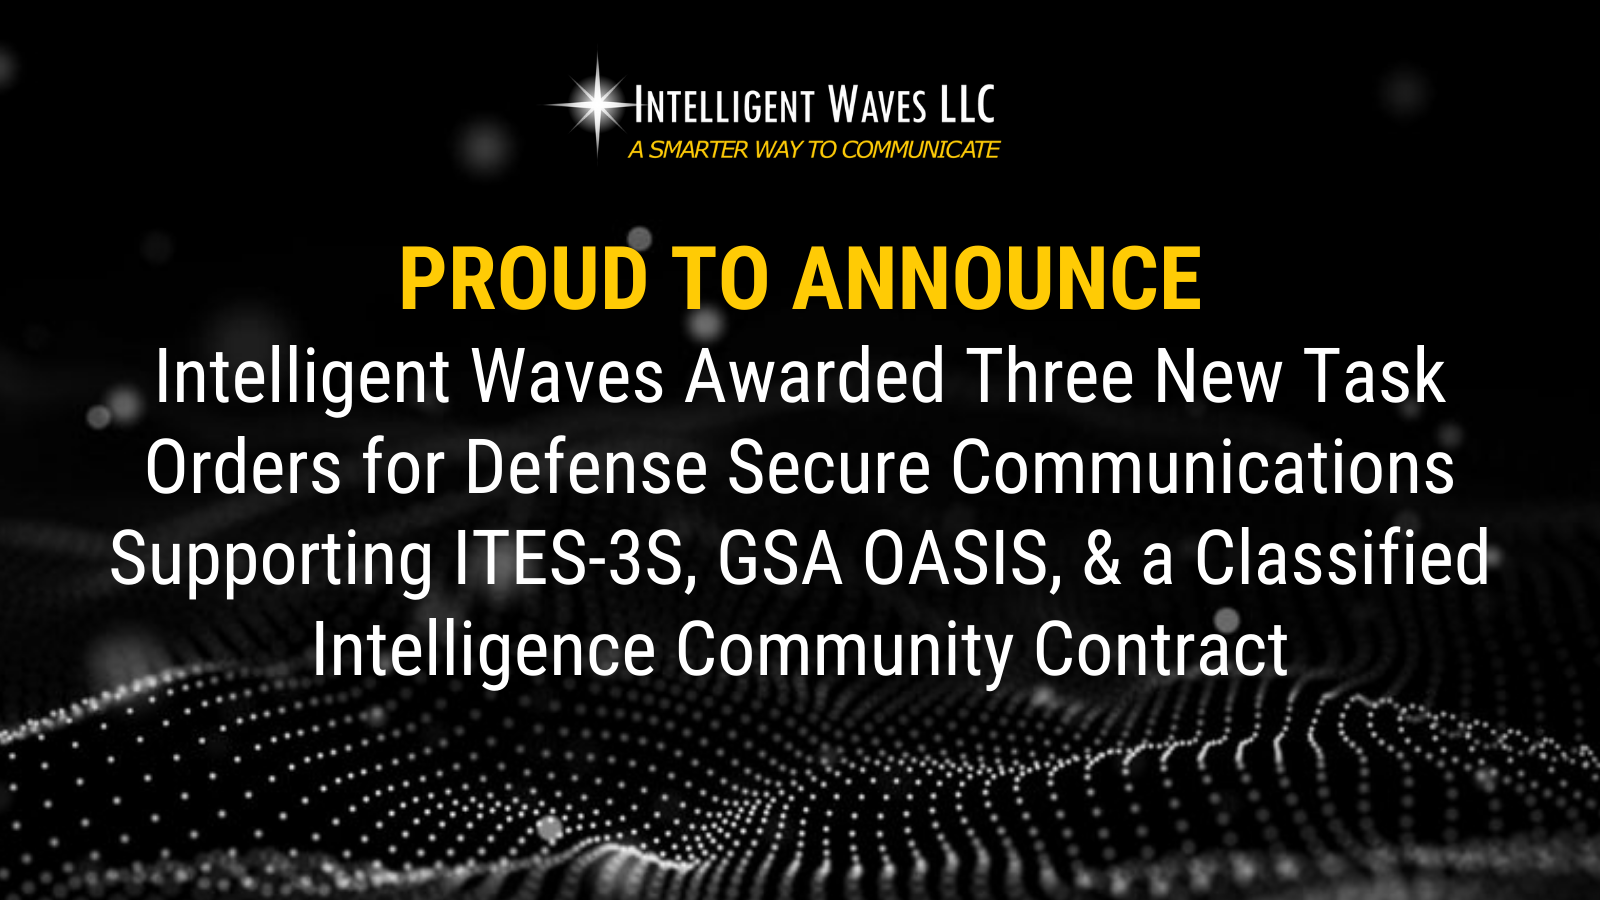 ITES 3S and GSA OASIS Task Order Wins Announcement